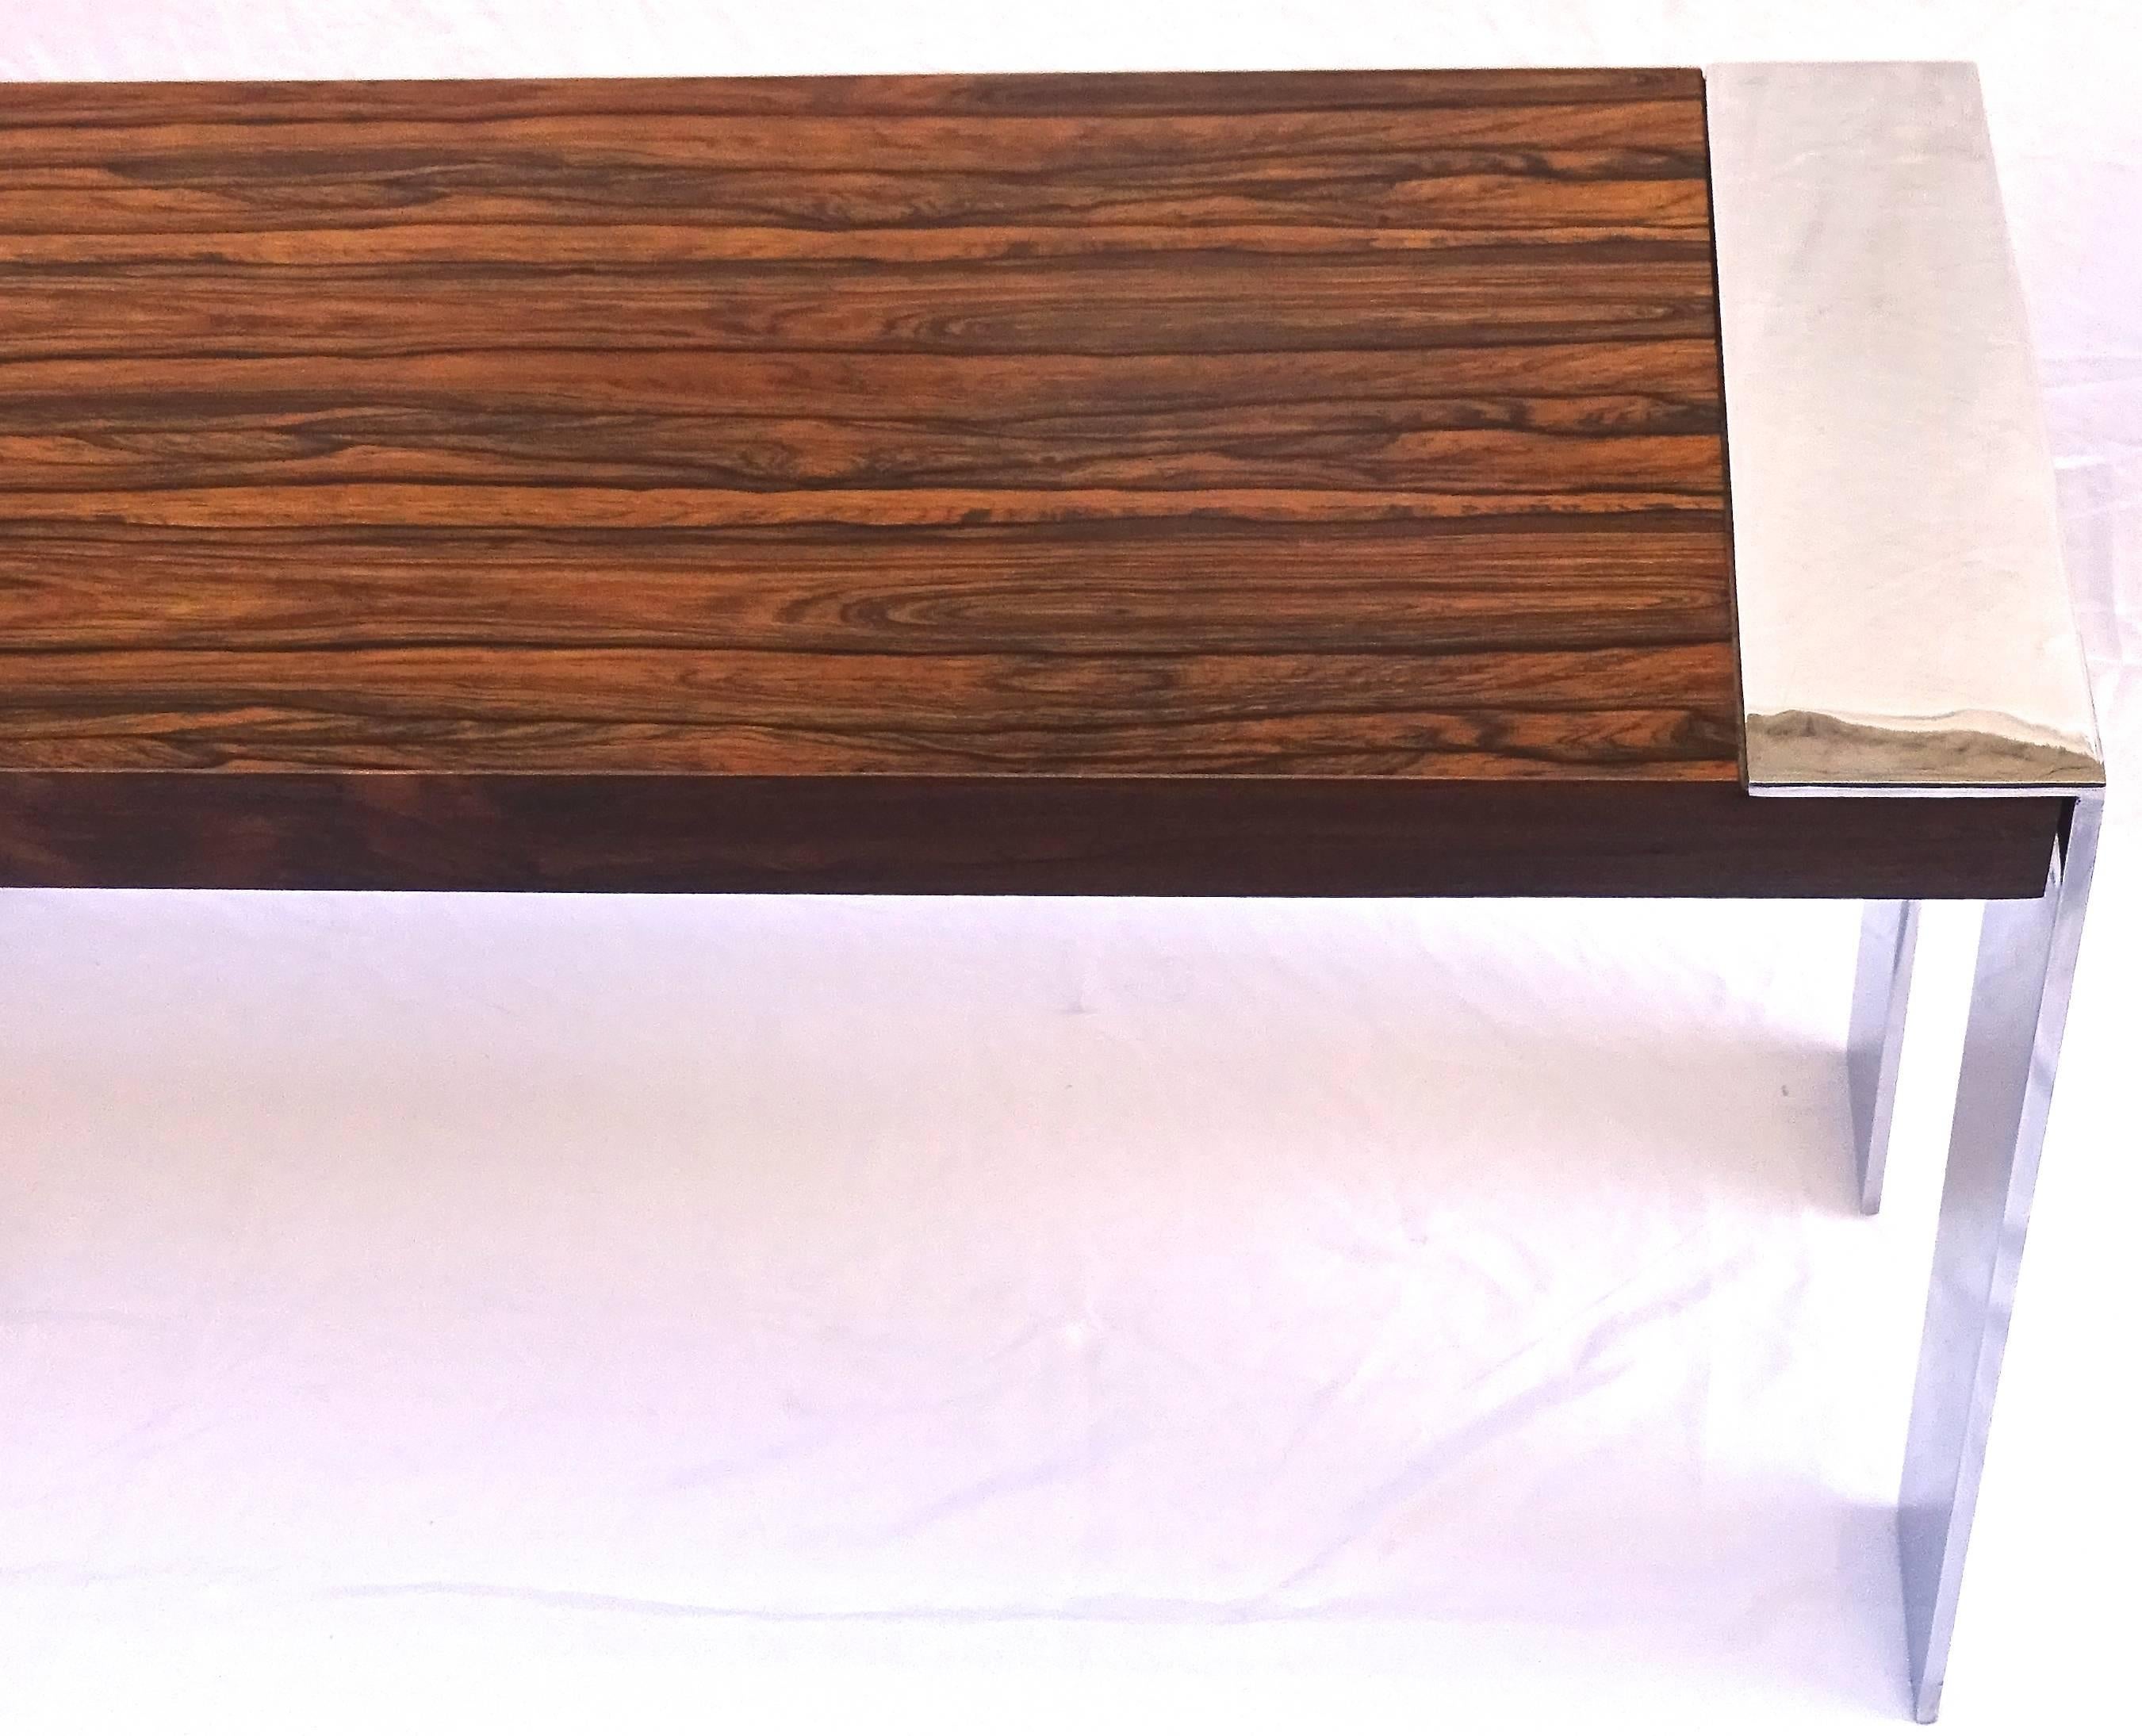 Sleek 1970s Milo Baughman Rosewood and Chromed Steel Console Table In Excellent Condition For Sale In Washington, DC